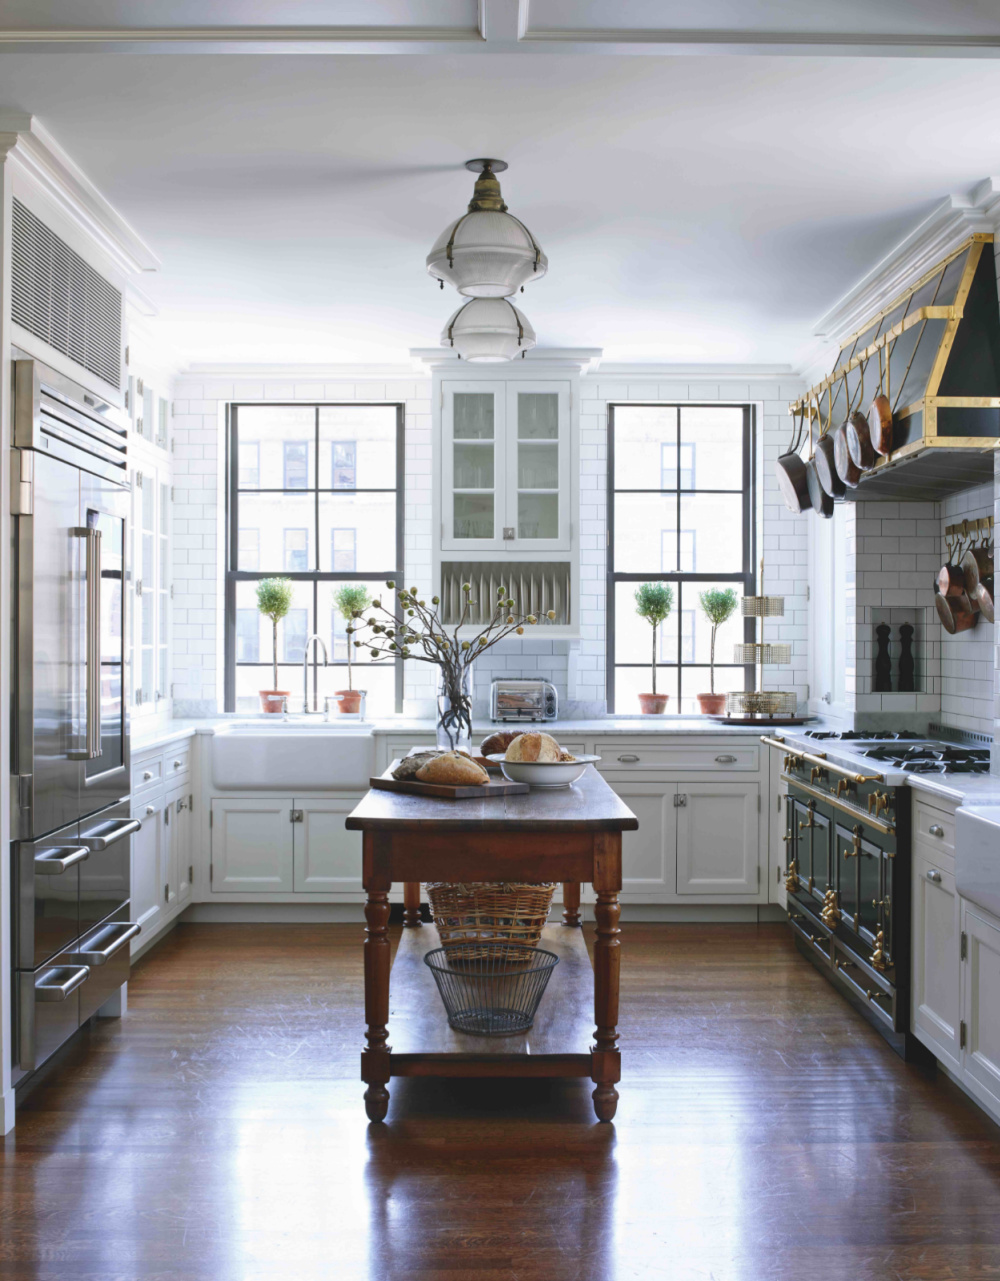 Classic sophisticated kitchen by Will Kopelman in an Upper East Side Manhattan apartment in NEW YORK INTERIORS. #newyorkkitchens #traditionalkitchens